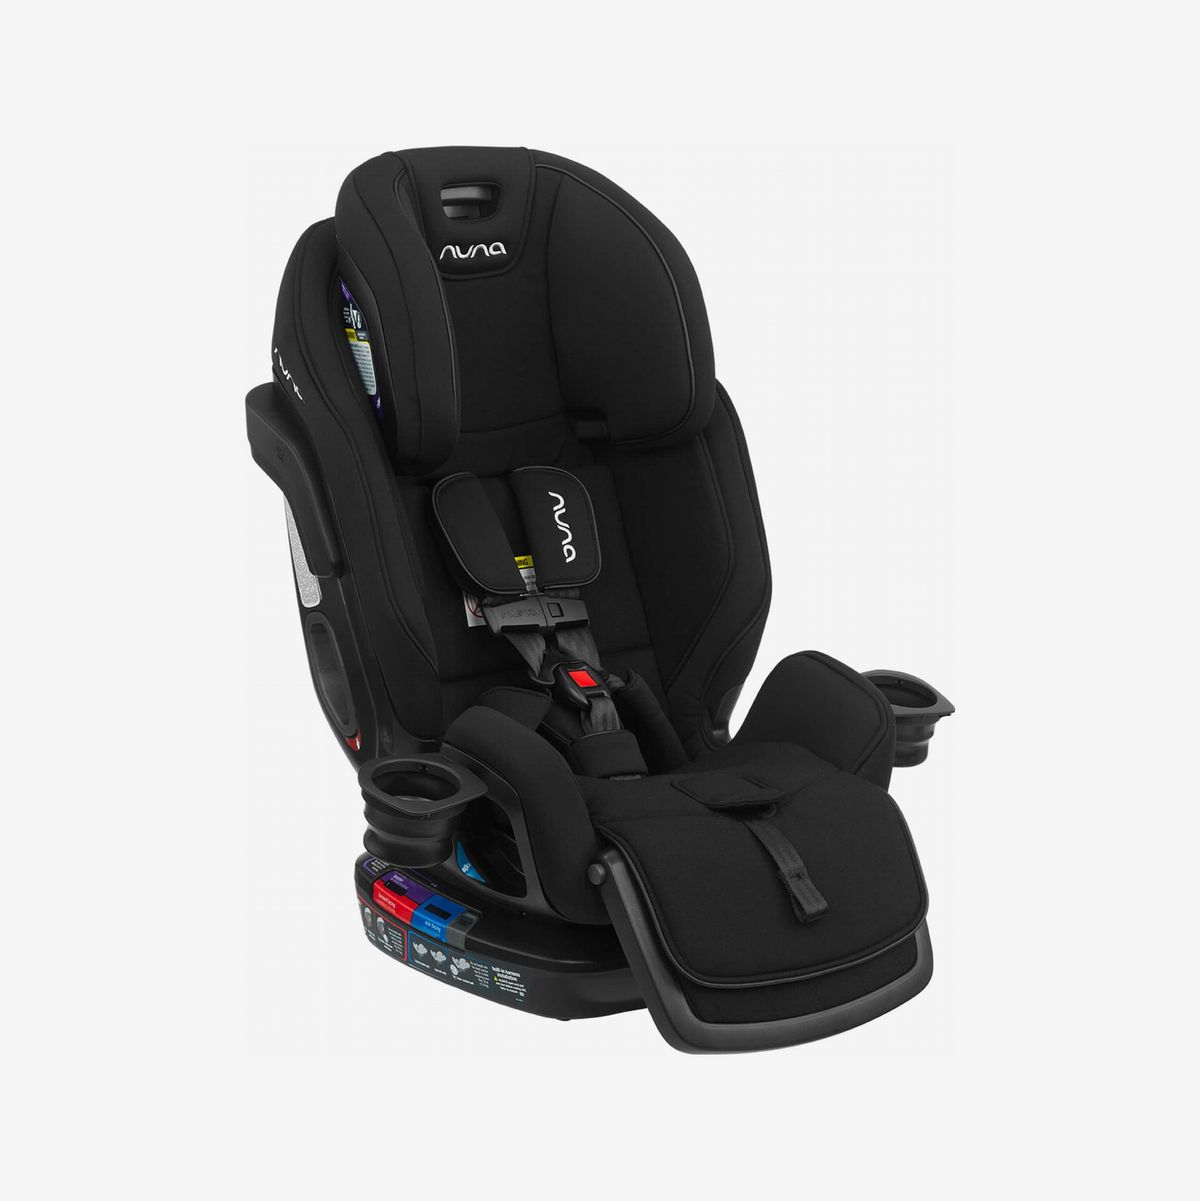 25 Best Infant Car Seats And Booster 2020 The Strategist - Baby Car Seat Reviews 2020